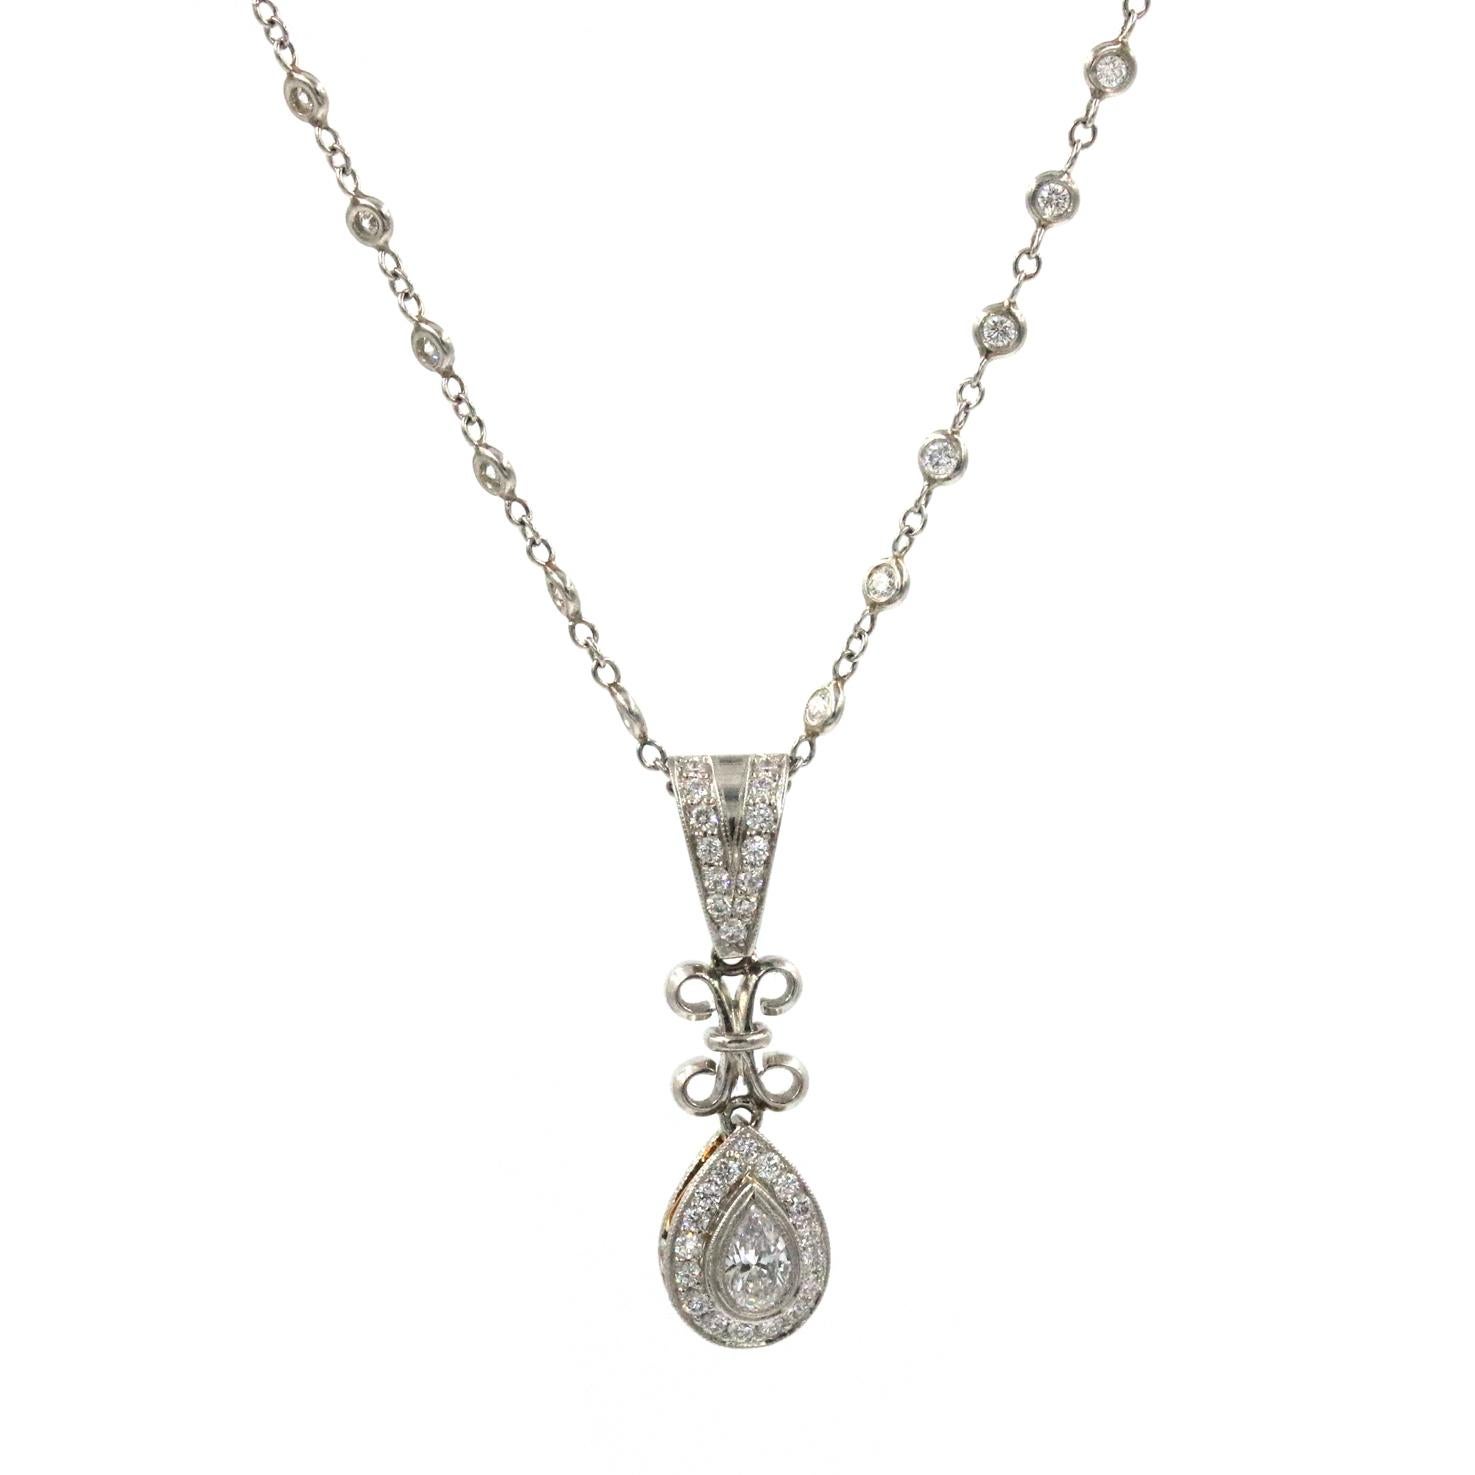 Michael Beaudry Platinum Diamond Pear Shaped Pendant With A Center .30 Ct Pear Shaped Diamonds G In Color VS Clarity. With  30 Accent Diamonds On The Pendant 1.20 CTW. This Pendant Is On A 17